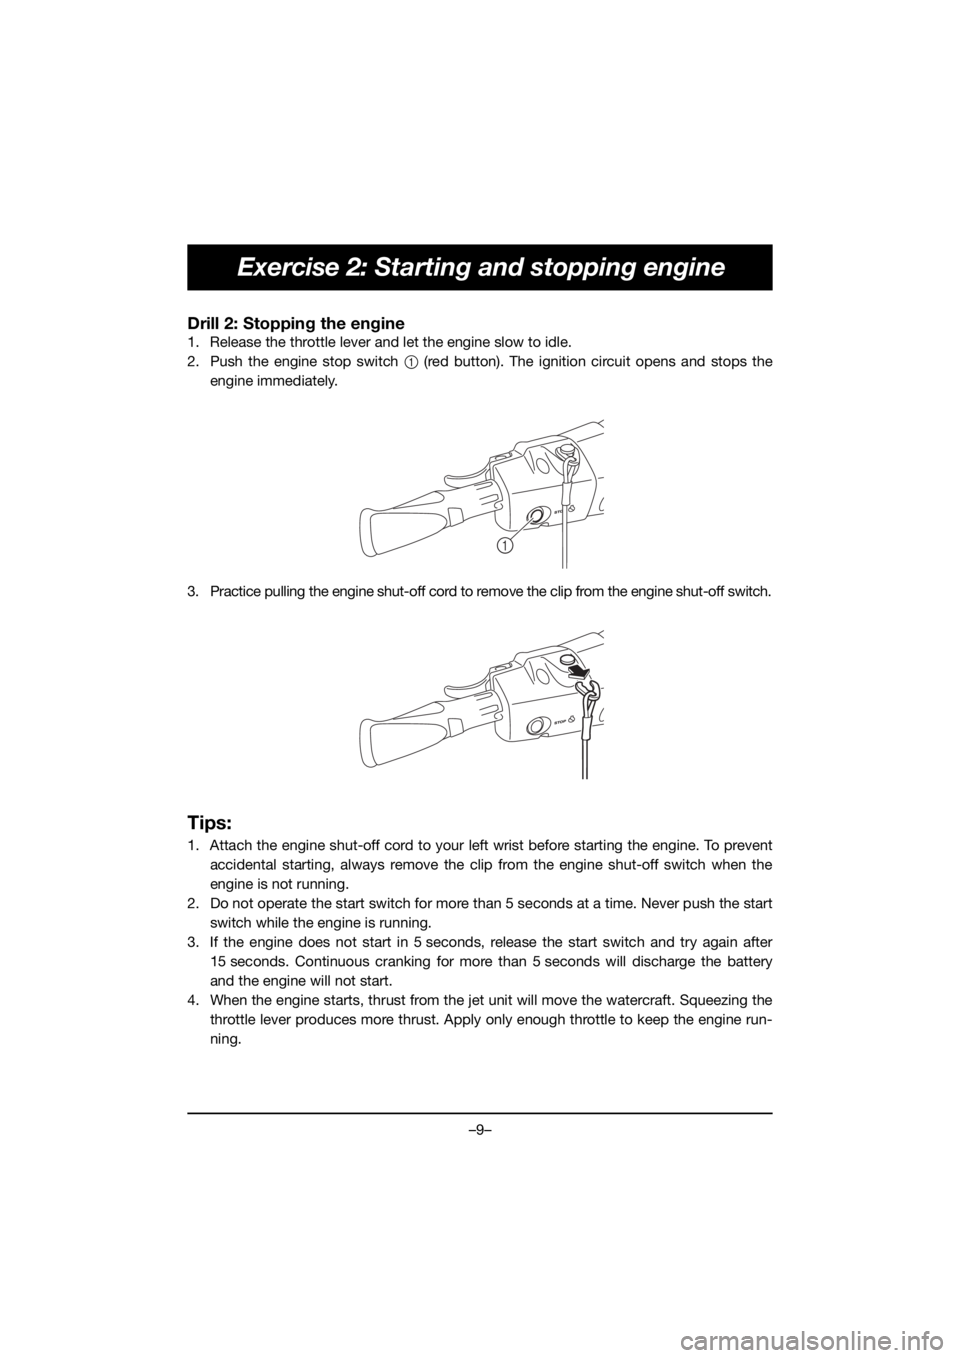 YAMAHA EXR 2020  Owners Manual –9–
Exercise 2: Starting and stopping engine
Drill 2: Stopping the engine
1. Release the throttle lever and let the engine slow to idle.
2. Push the engine stop switch 1 (red button). The ignition